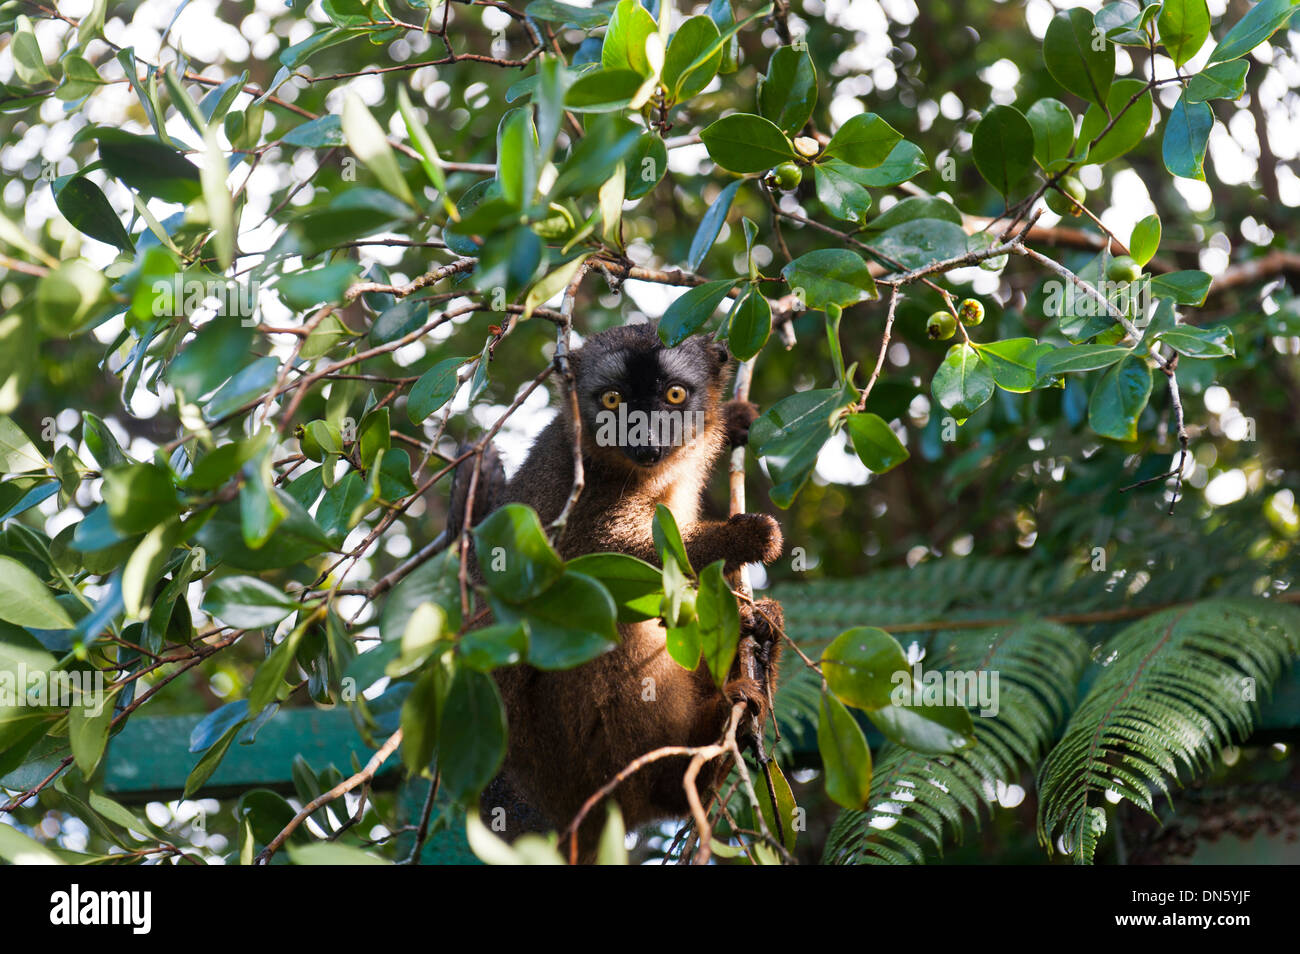 Red-fronted Lemur (Eulemur rufifrons), in green foliage, Ranomafana National Park, Madagascar Stock Photo